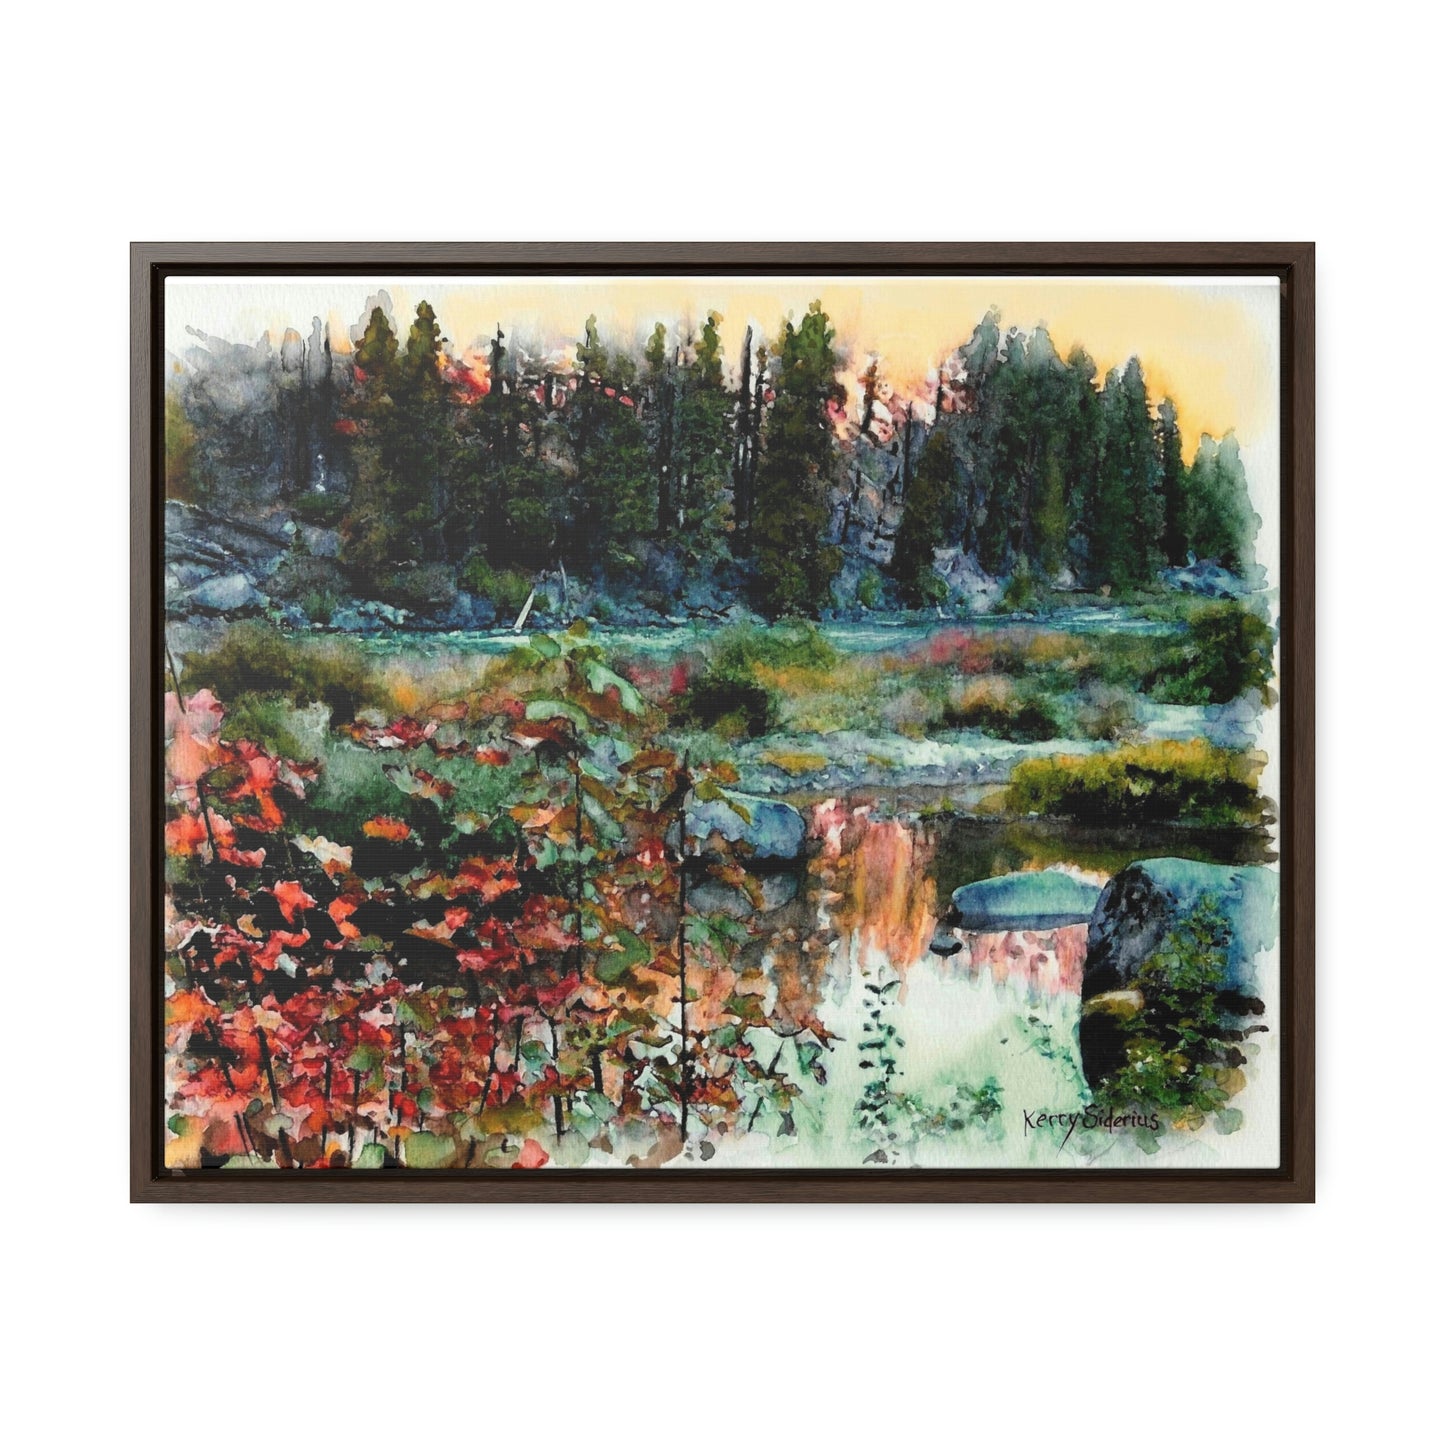 "Tumwater Pink Sunset" Gallery Wrapped Wood Framed Canvas - Kerry Siderius Art 